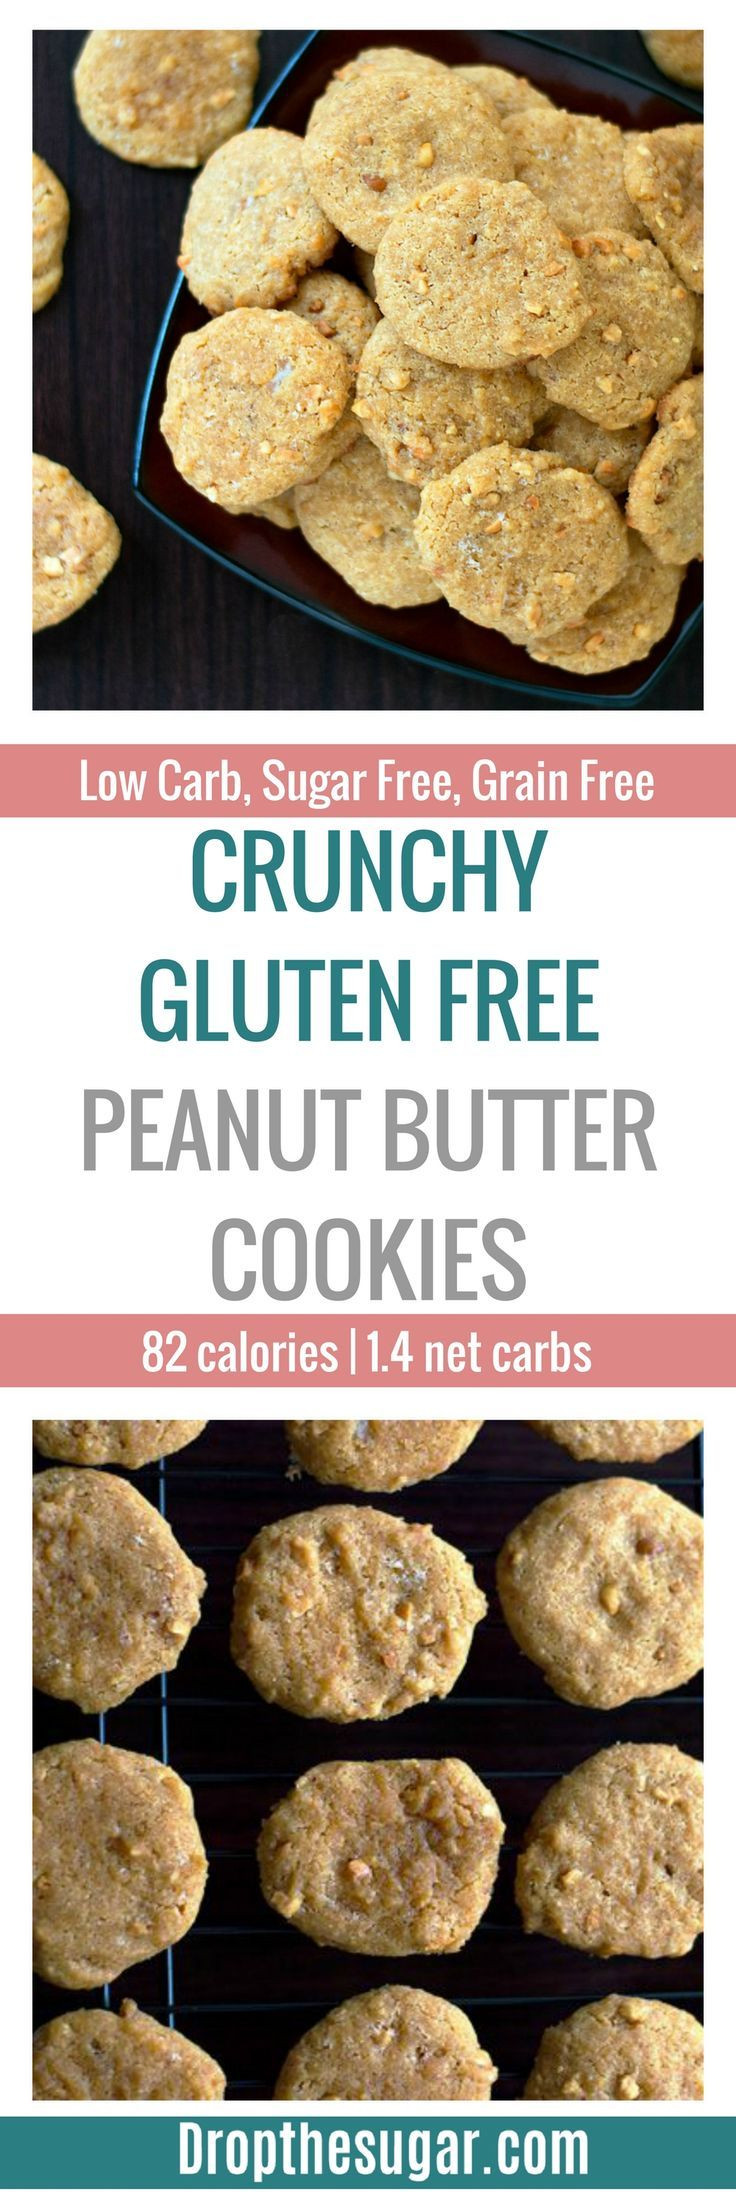 Gluten Free Peanut Butter Cookies With Gluten Free Flour
 17 Best images about Low Carb Cookie Recipes on Pinterest